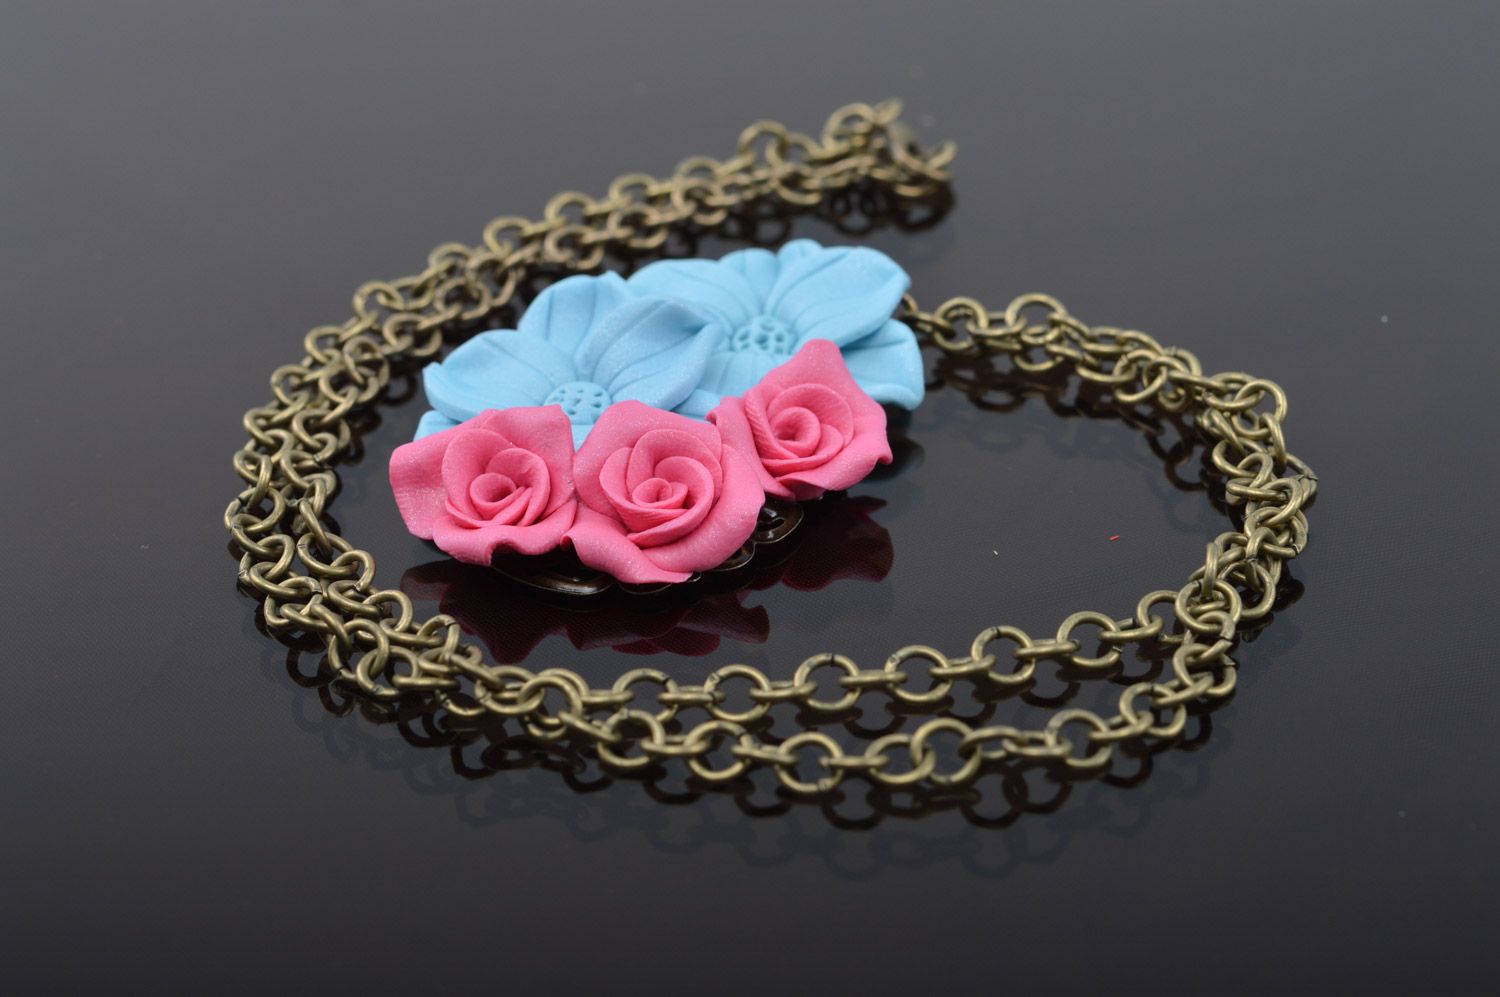 Homemade polymer clay flower neck pendant with metal chain photo 4